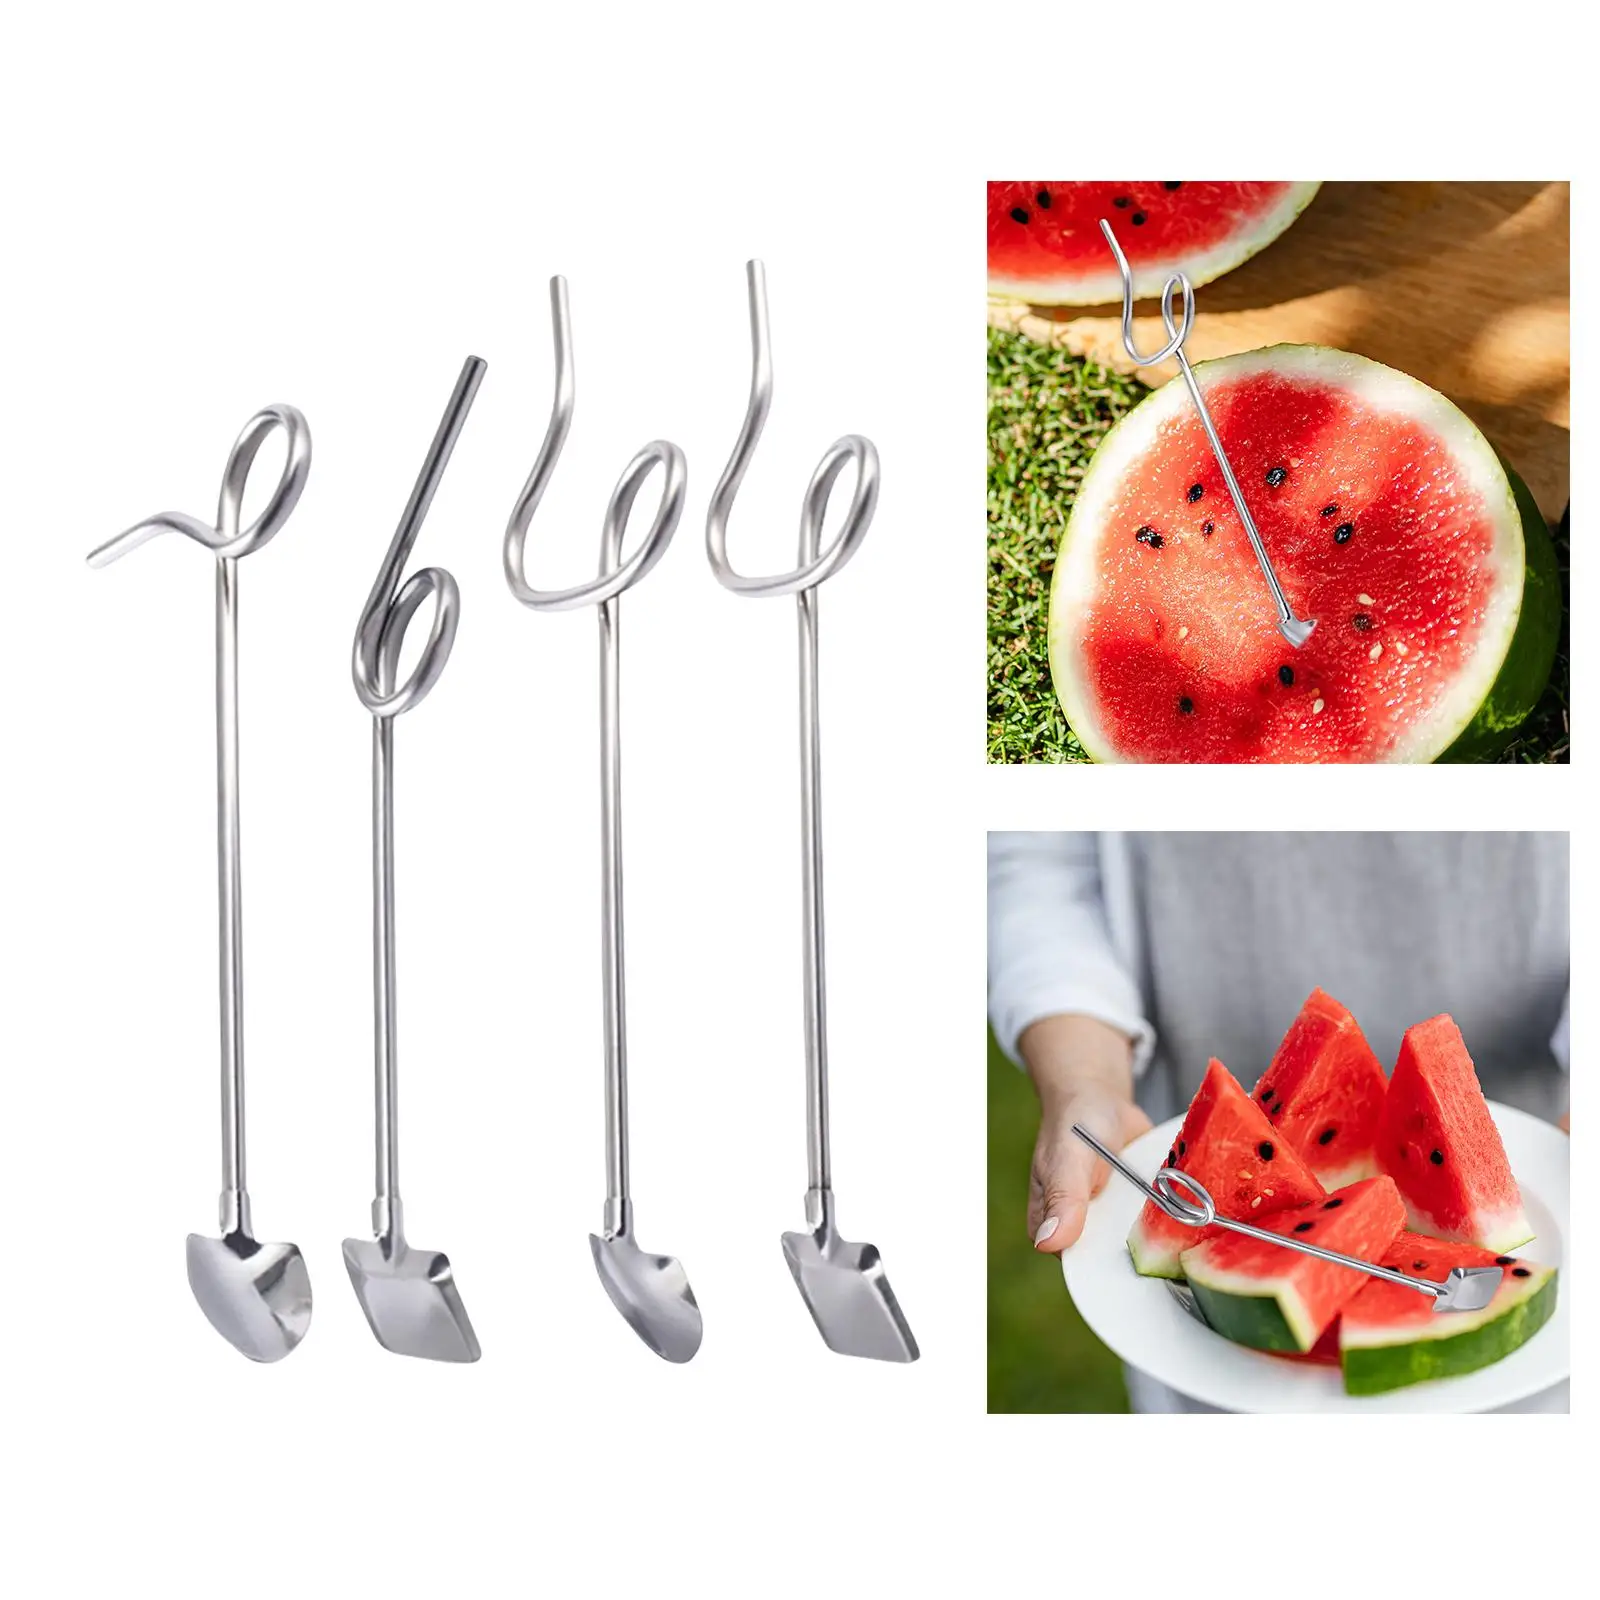 Reusable Straws Scoop Lightweight Irregular Multifunctional Tableware Stainless Steel for Mixing Kitchen Smoothies Coffee Tea